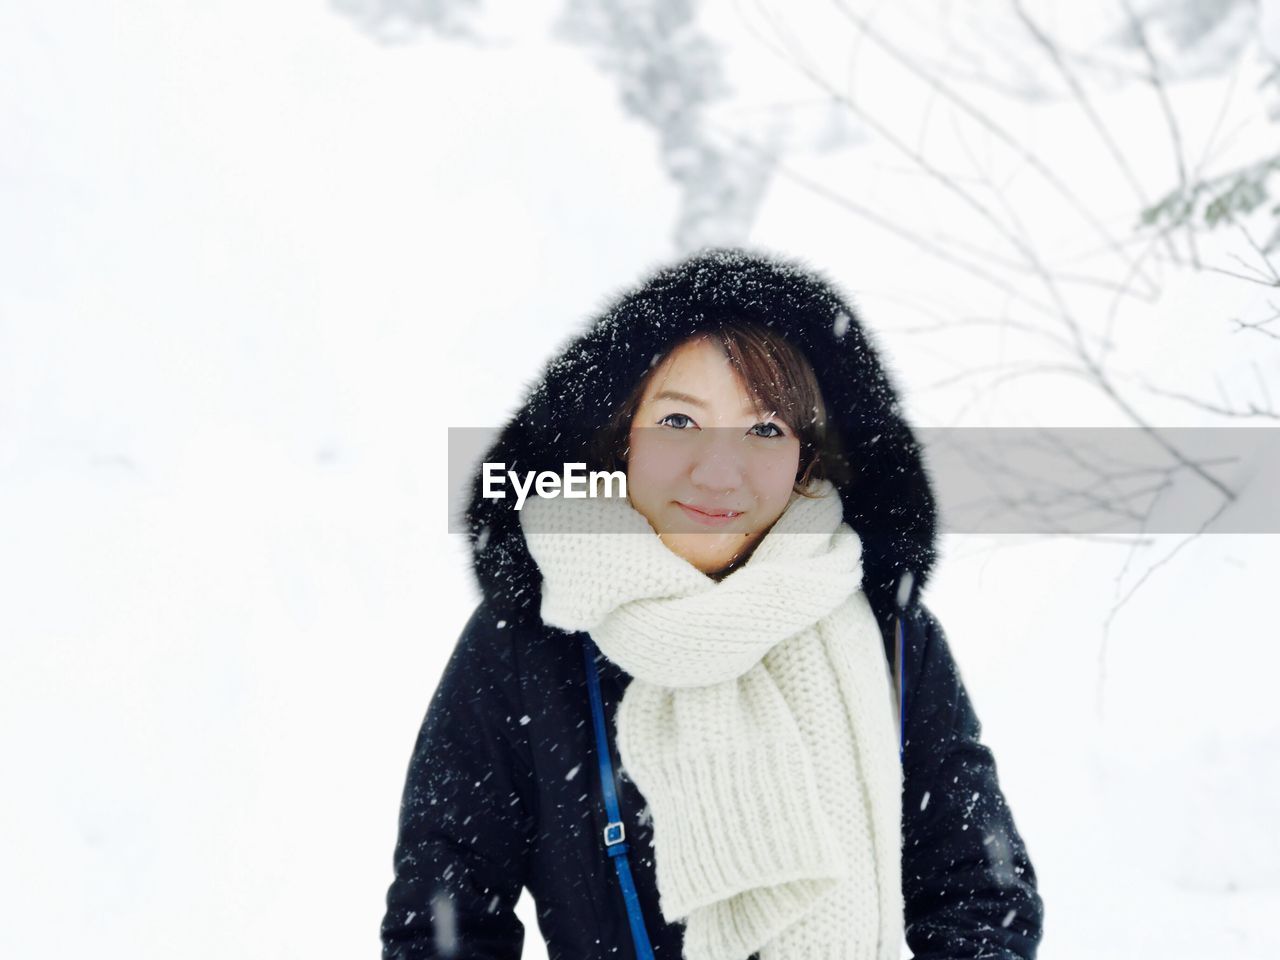 PORTRAIT OF BEAUTIFUL YOUNG WOMAN IN SNOW